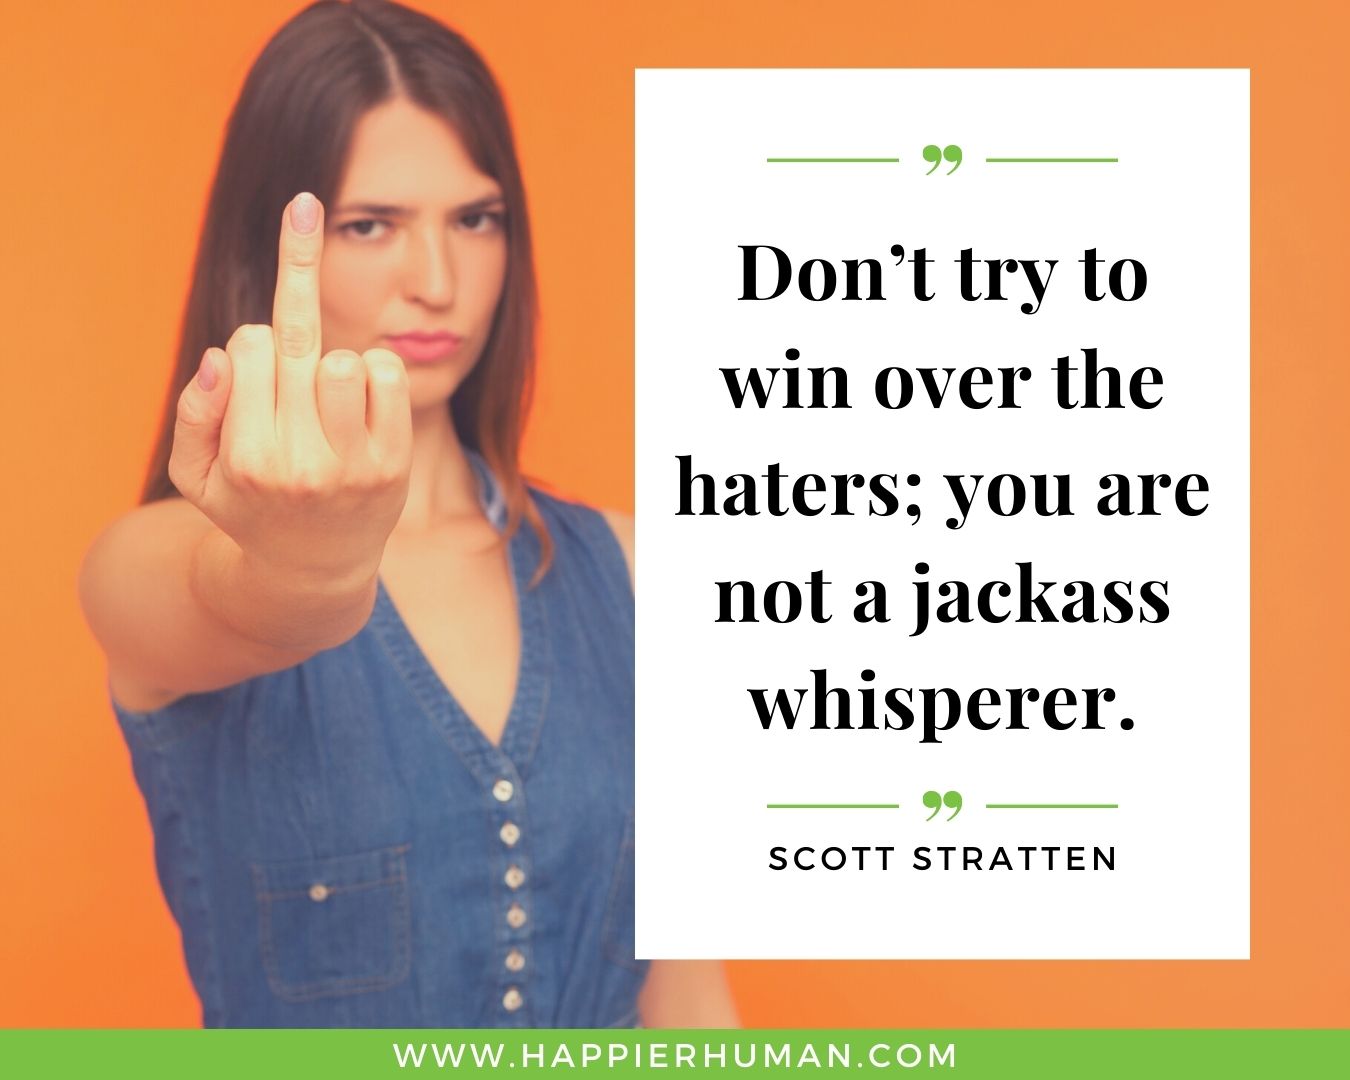 Haters Quotes - “Don’t try to win over the haters; you are not a jackass whisperer.” - Scott Stratten